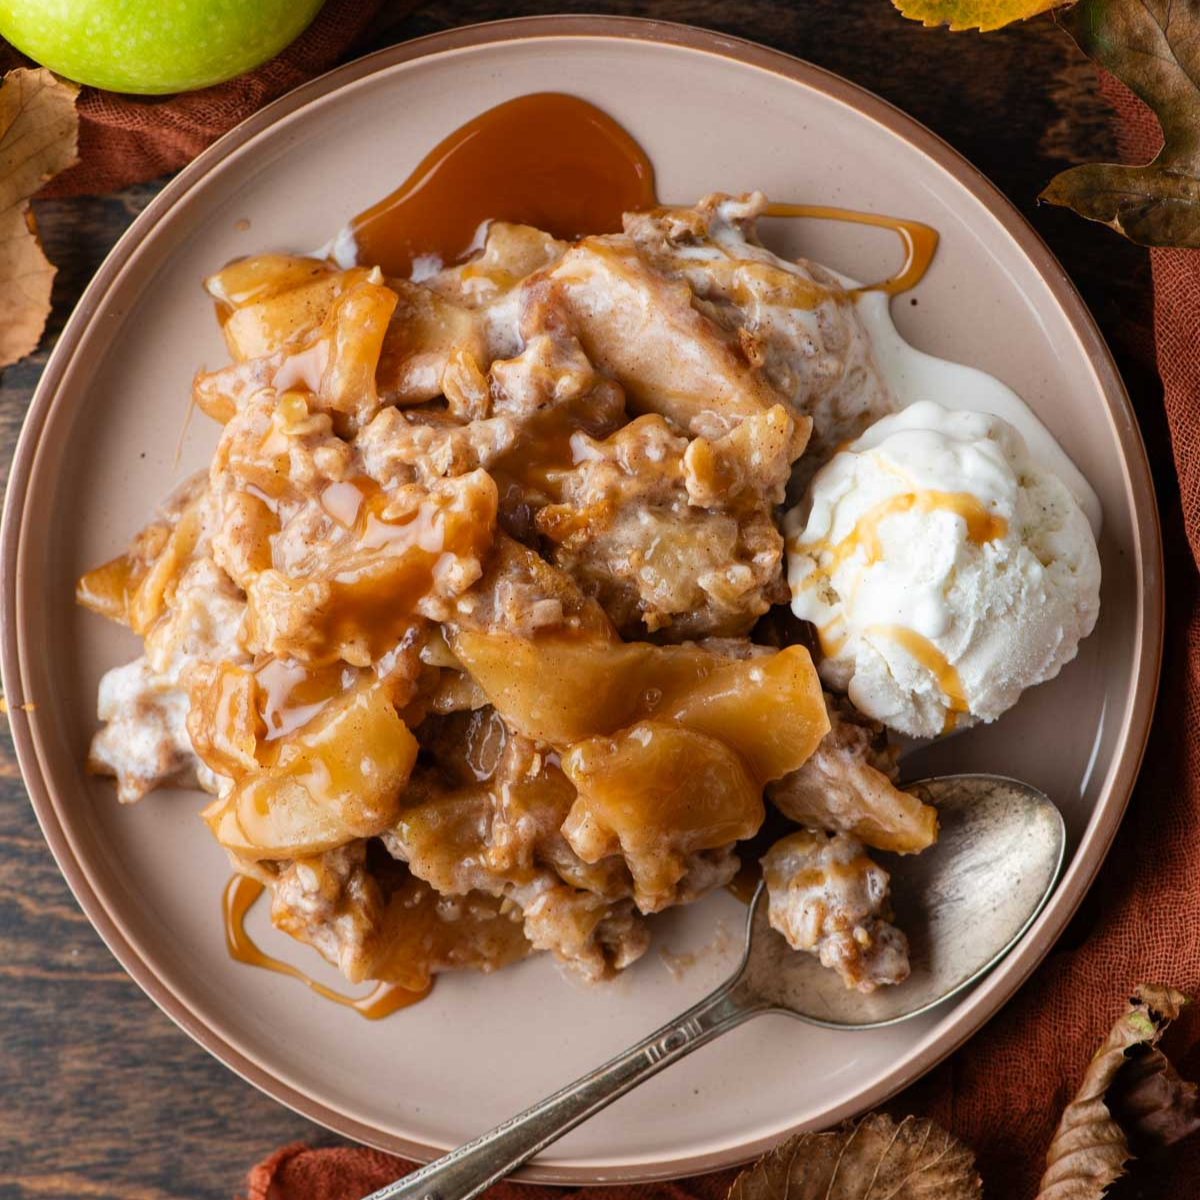 apple crisp on a plate drizzled with caramel sauce with a scoop of ice cream and a spoon beside it and fresh apples, fall leaves and an orange towel around it